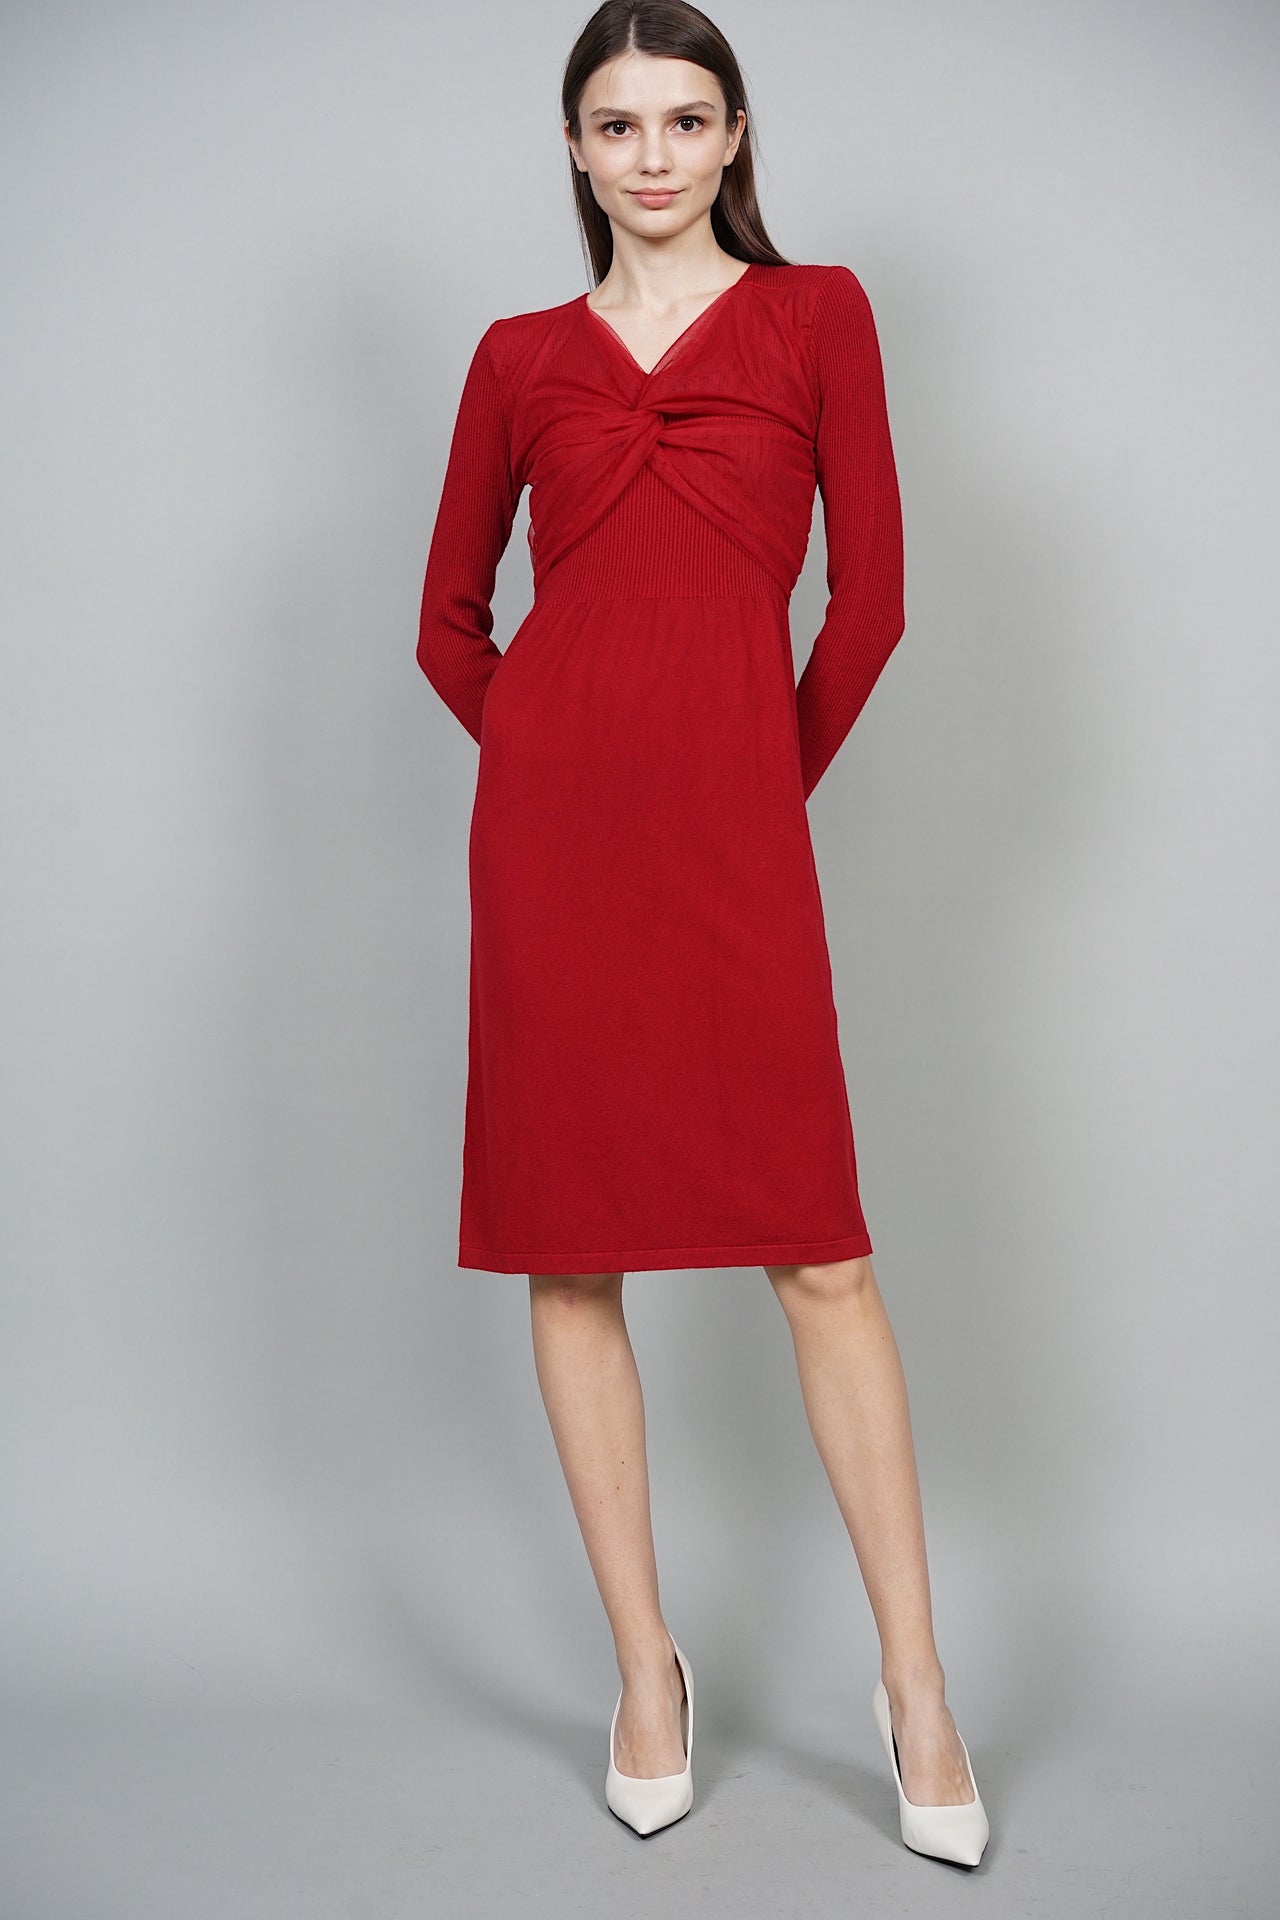 EVERYDAY / Lucca Twist Knot Midi Dress in Red